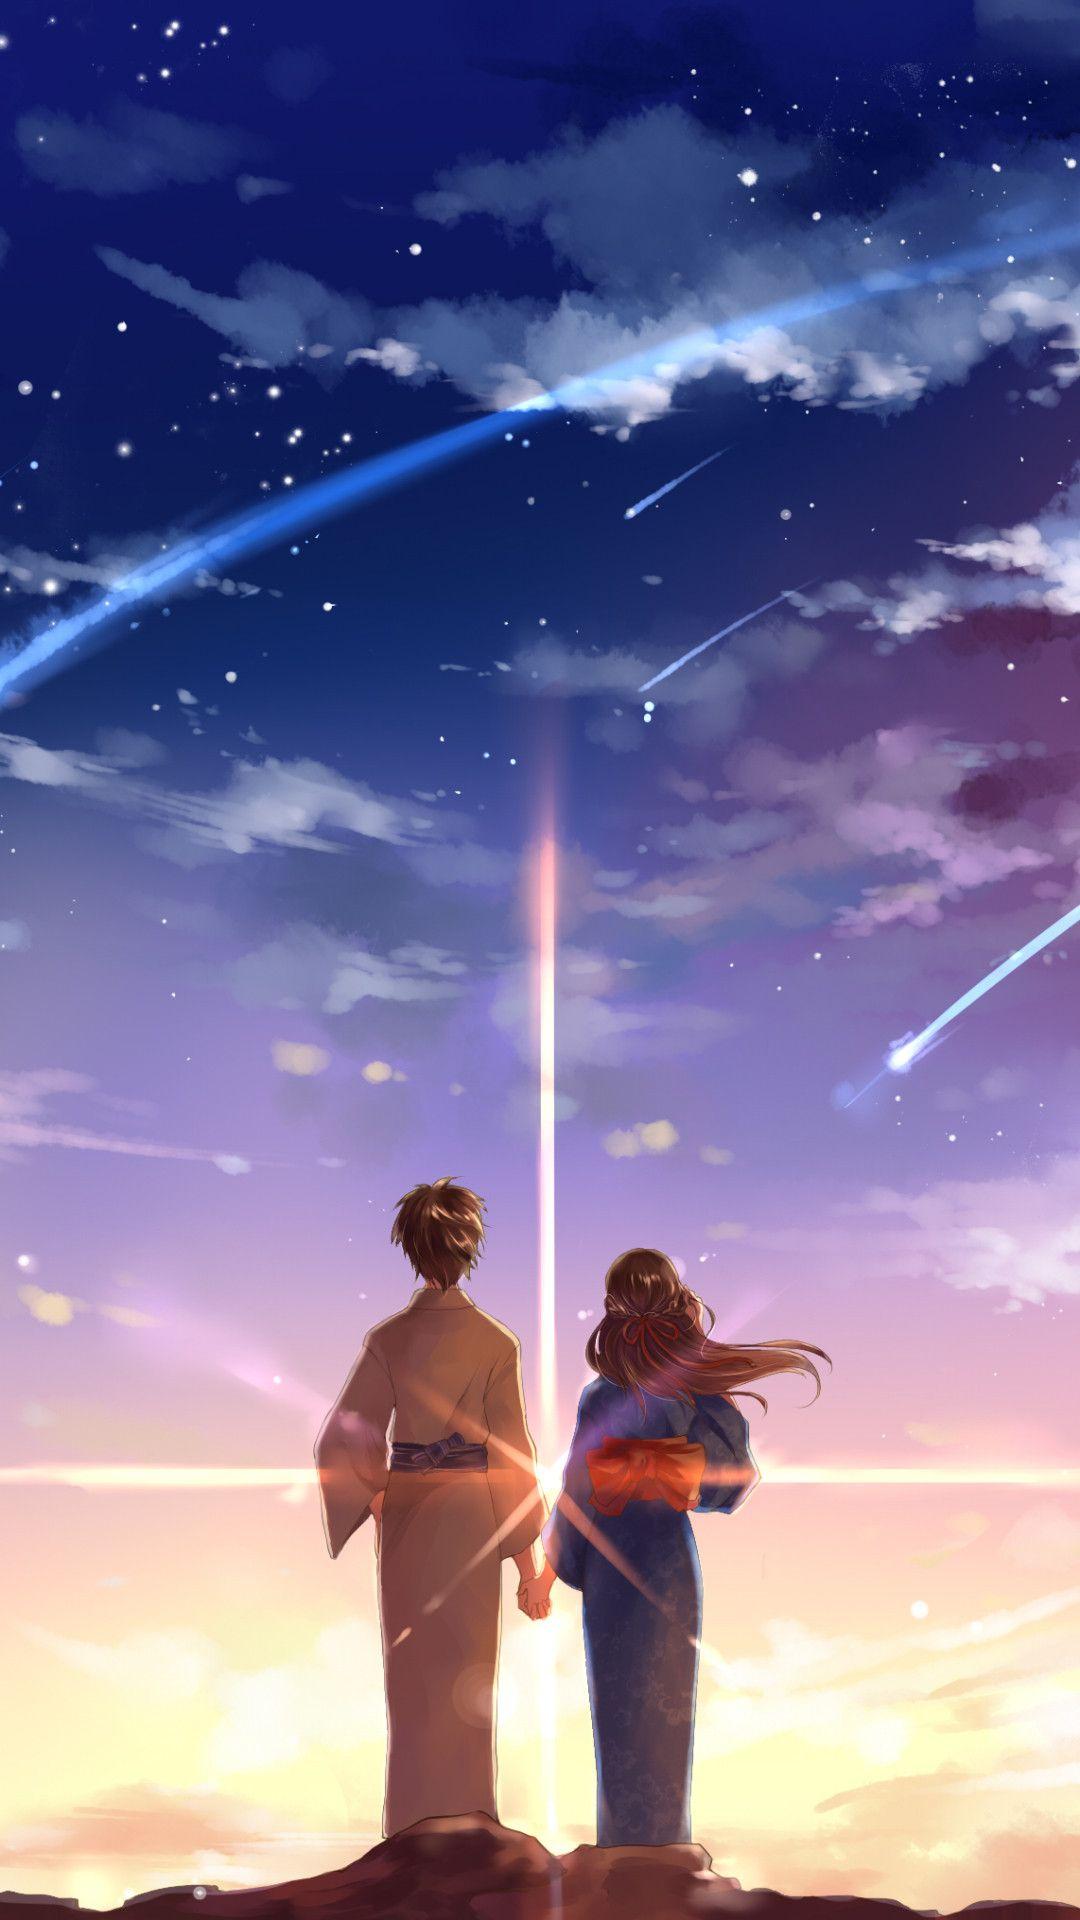 Your Name Anime iPhone Wallpaper Free Your Name Anime